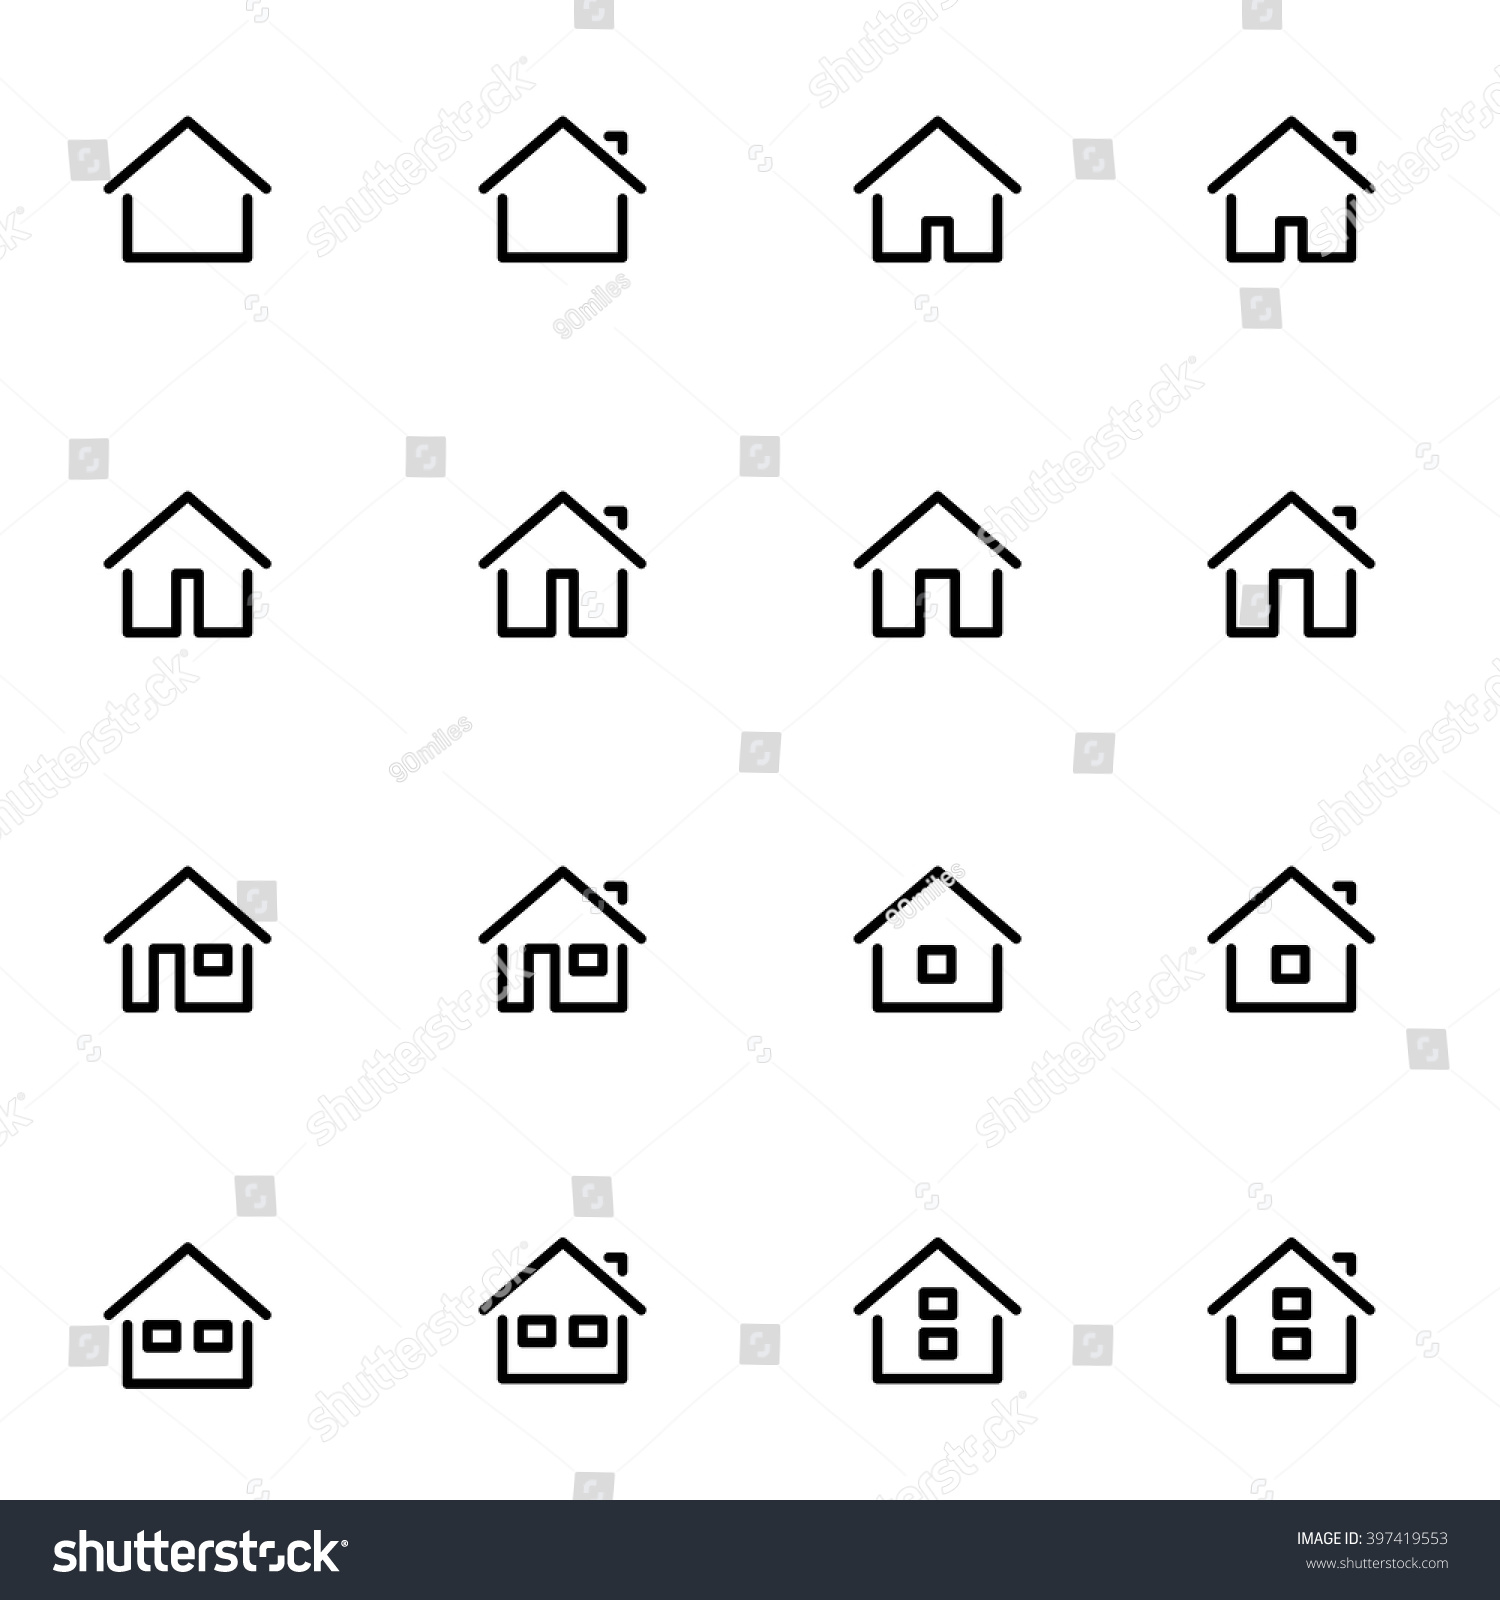 SVG of Set 1 of line icons representing house Vector Illustration. House and home simple symbols svg